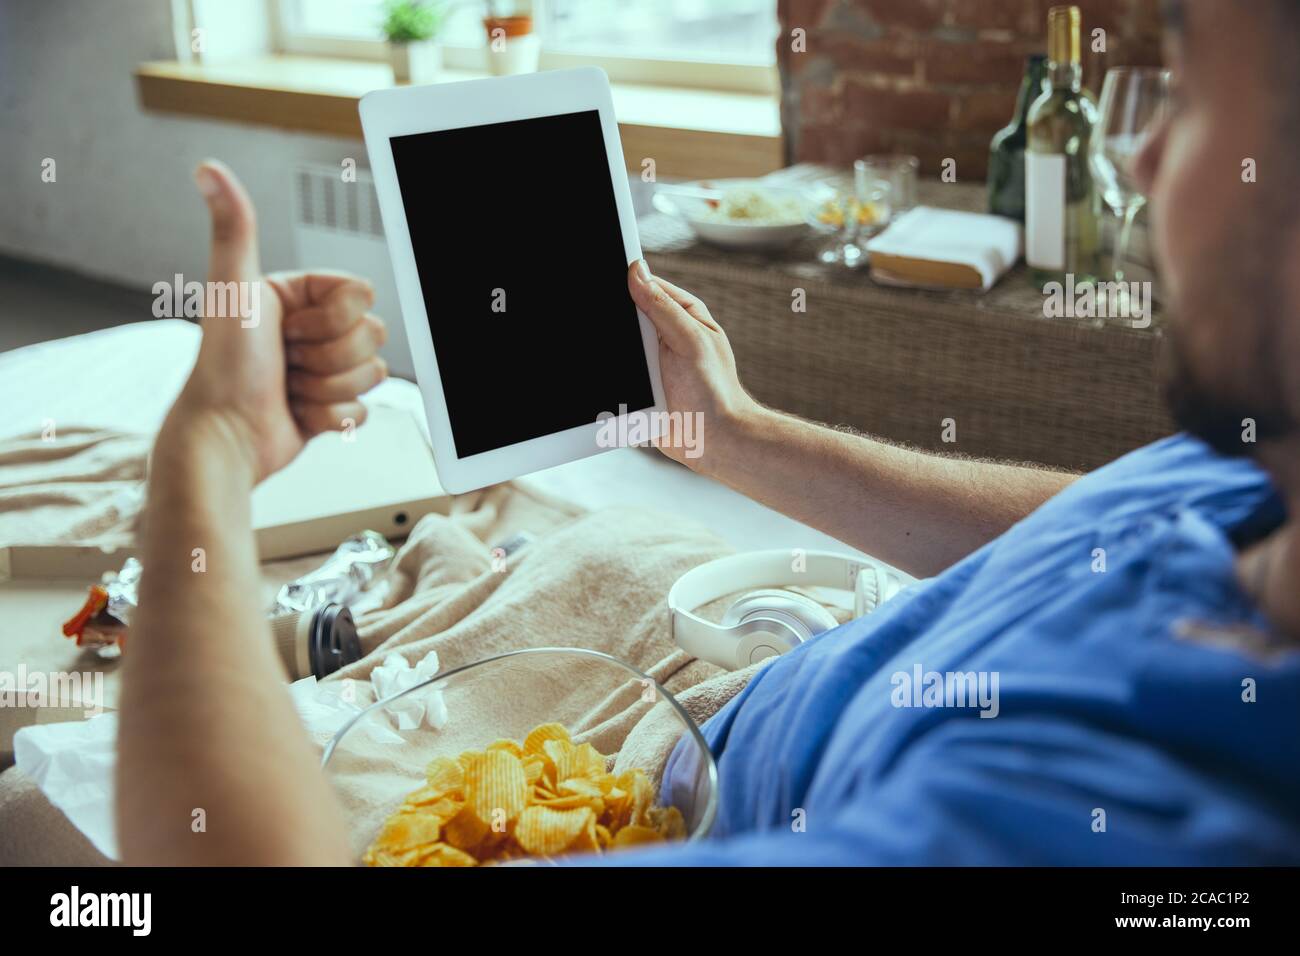 Eating crisps, thumb up. Lazy man living in his bed surrounded with messy. No need to go out to be happy. Using gadgets, watching movie and series, looks emotional. Tablet with copyspace for ad. Stock Photo